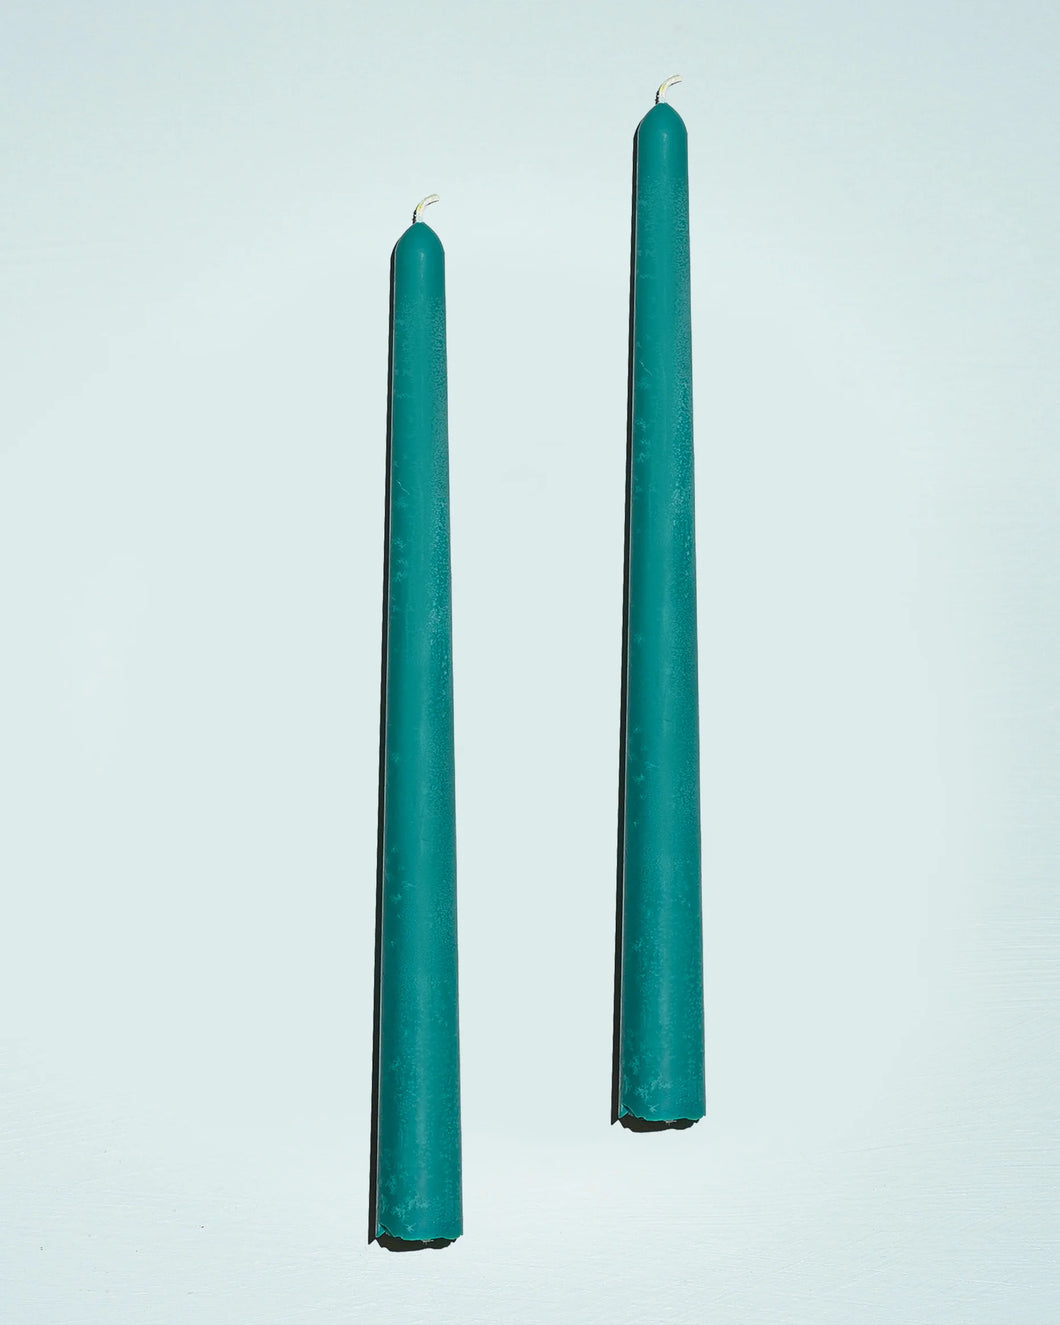 Beeswax/Soy Blend Taper Candles - Emerald